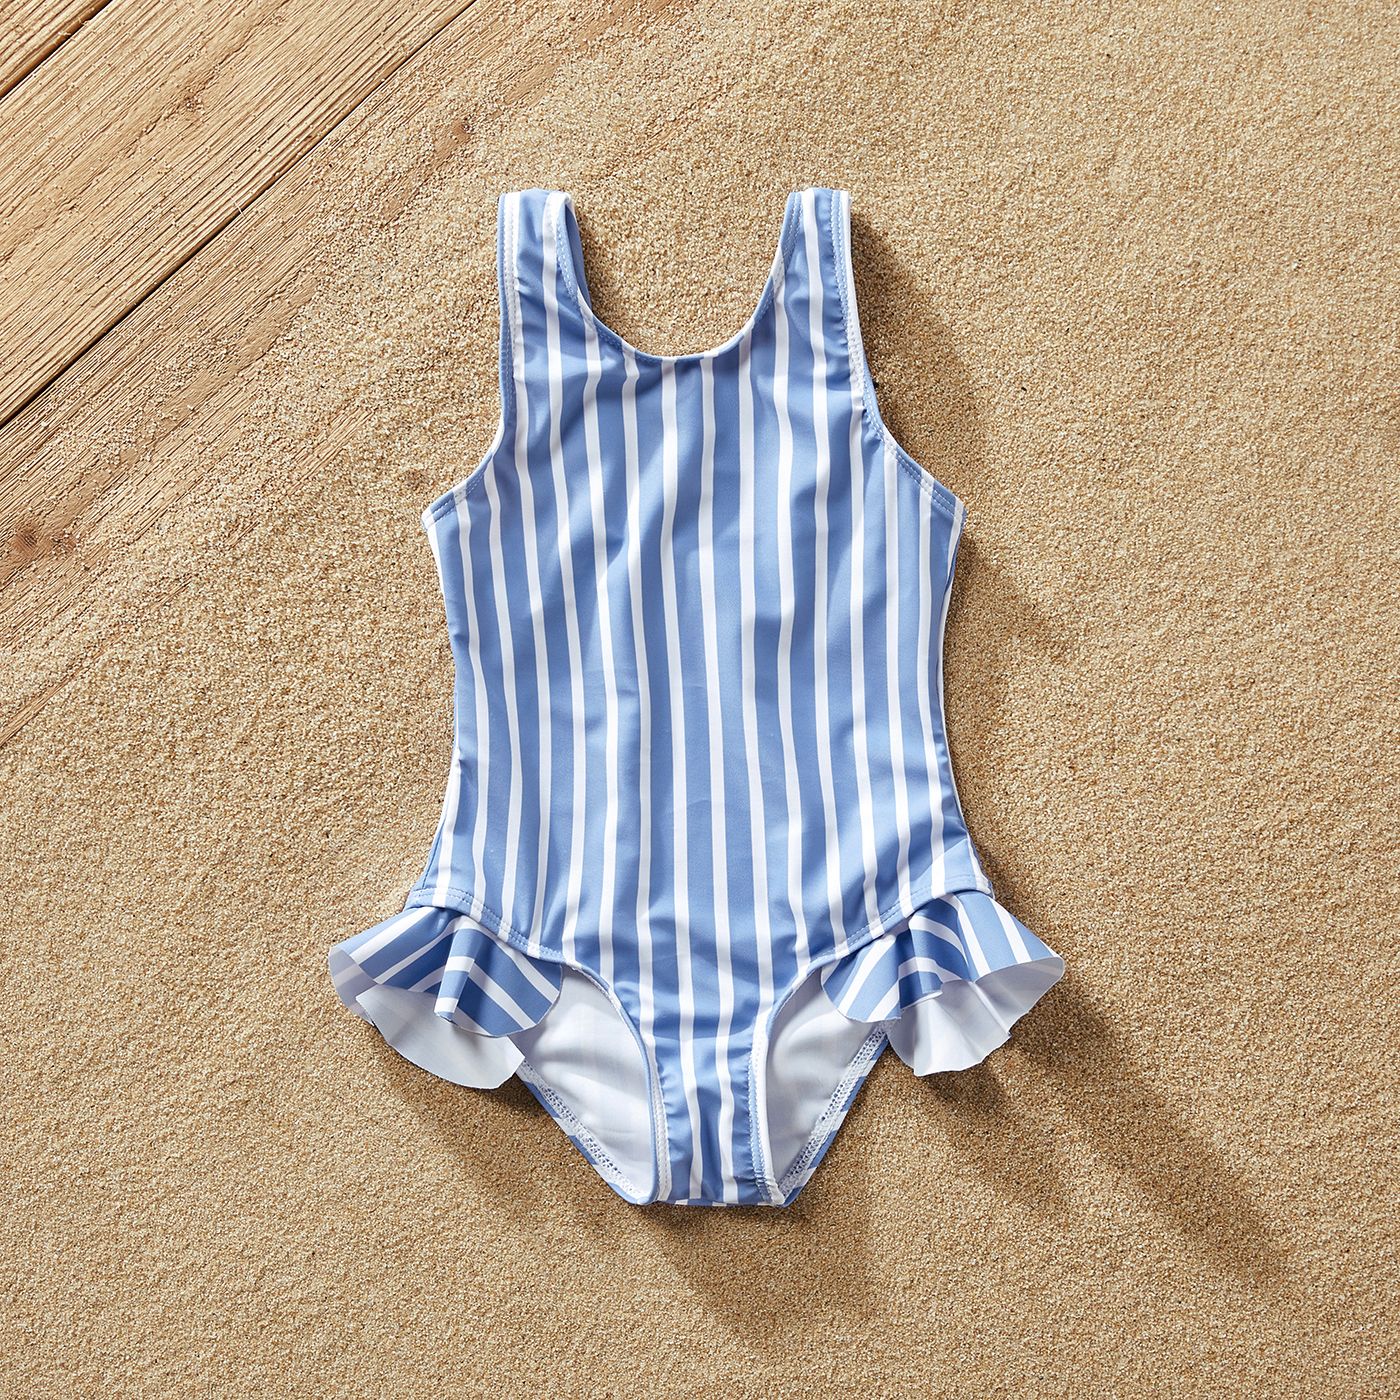 Family Matching Allover Stripe Pattern One-piece Swimsuit Or Swim Trunks Shorts